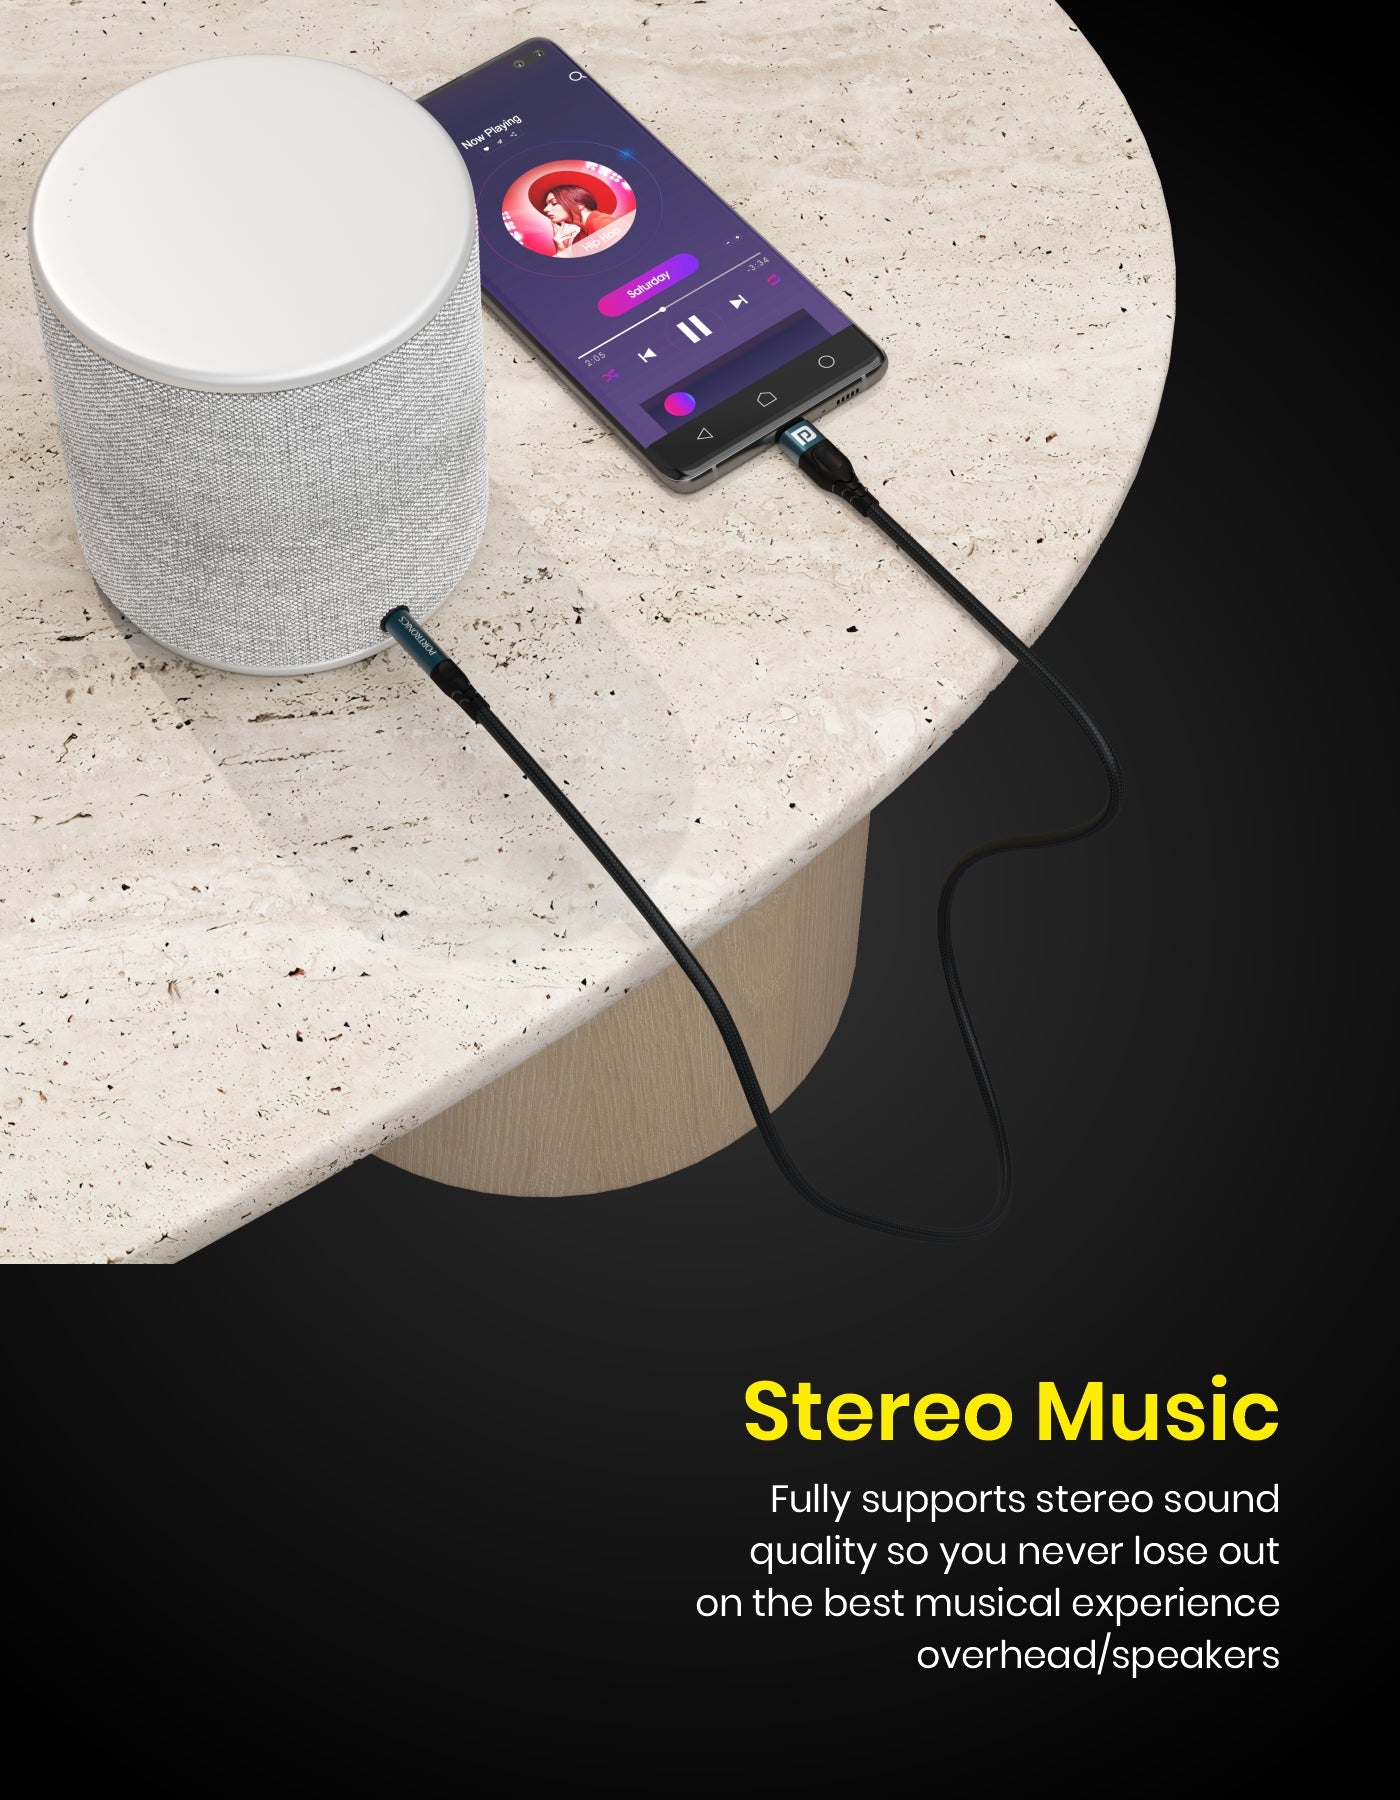 Portronics iKonnect C MAX, 8 pin to 3.5 mm AUX Connectorcomes with stereo speakers for premium listening experience